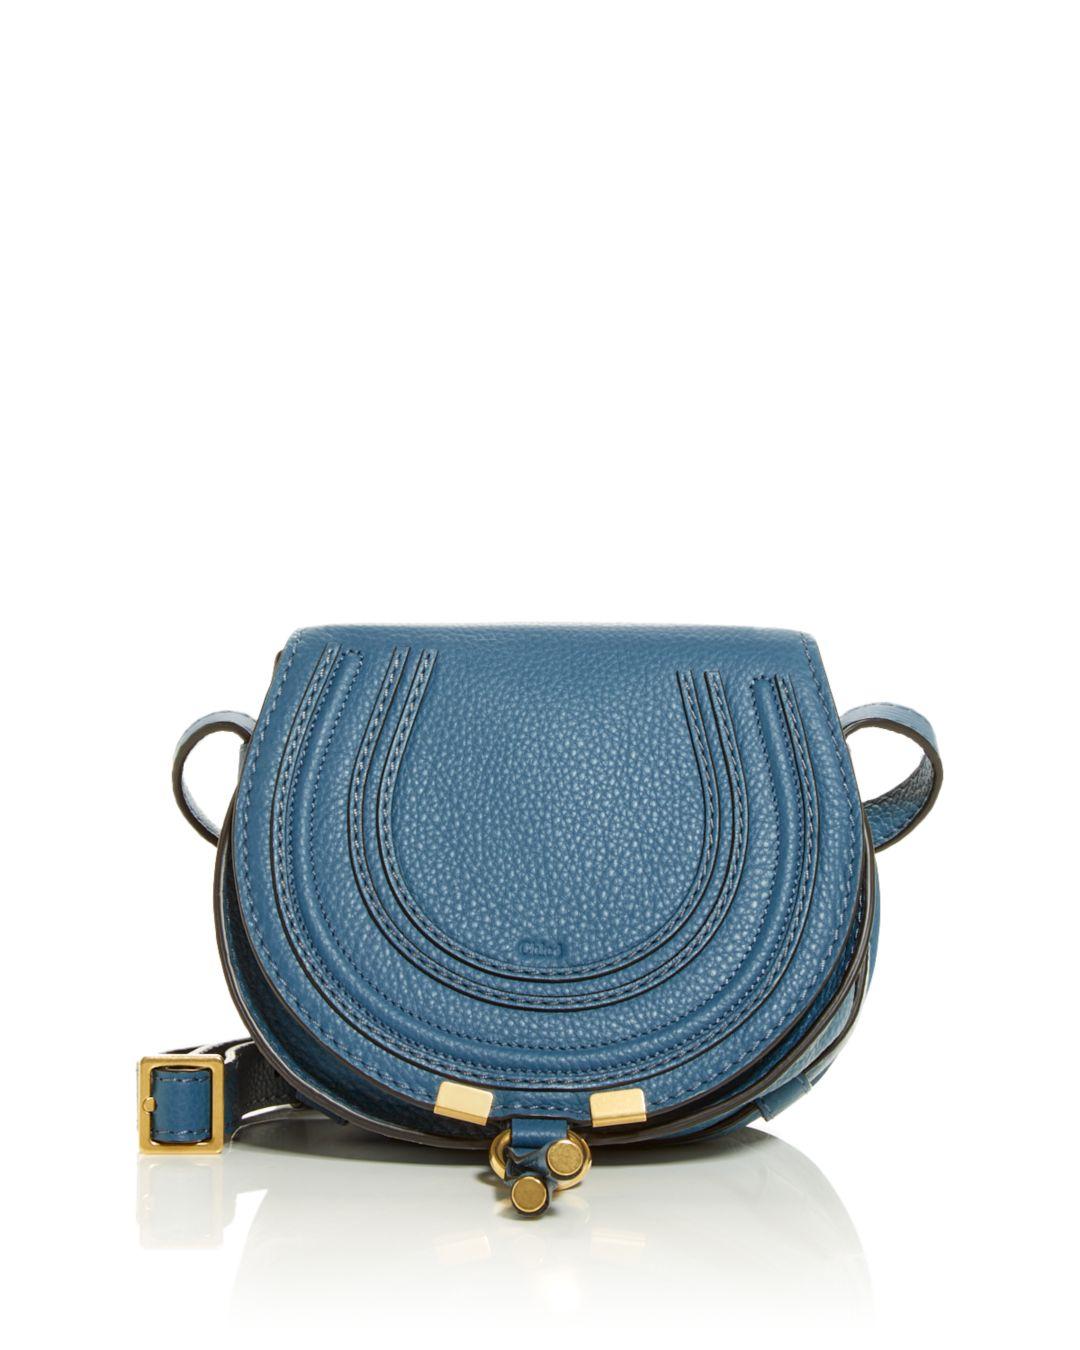 Chloé Marcie Small Leather Saddle Bag in Blue | Lyst